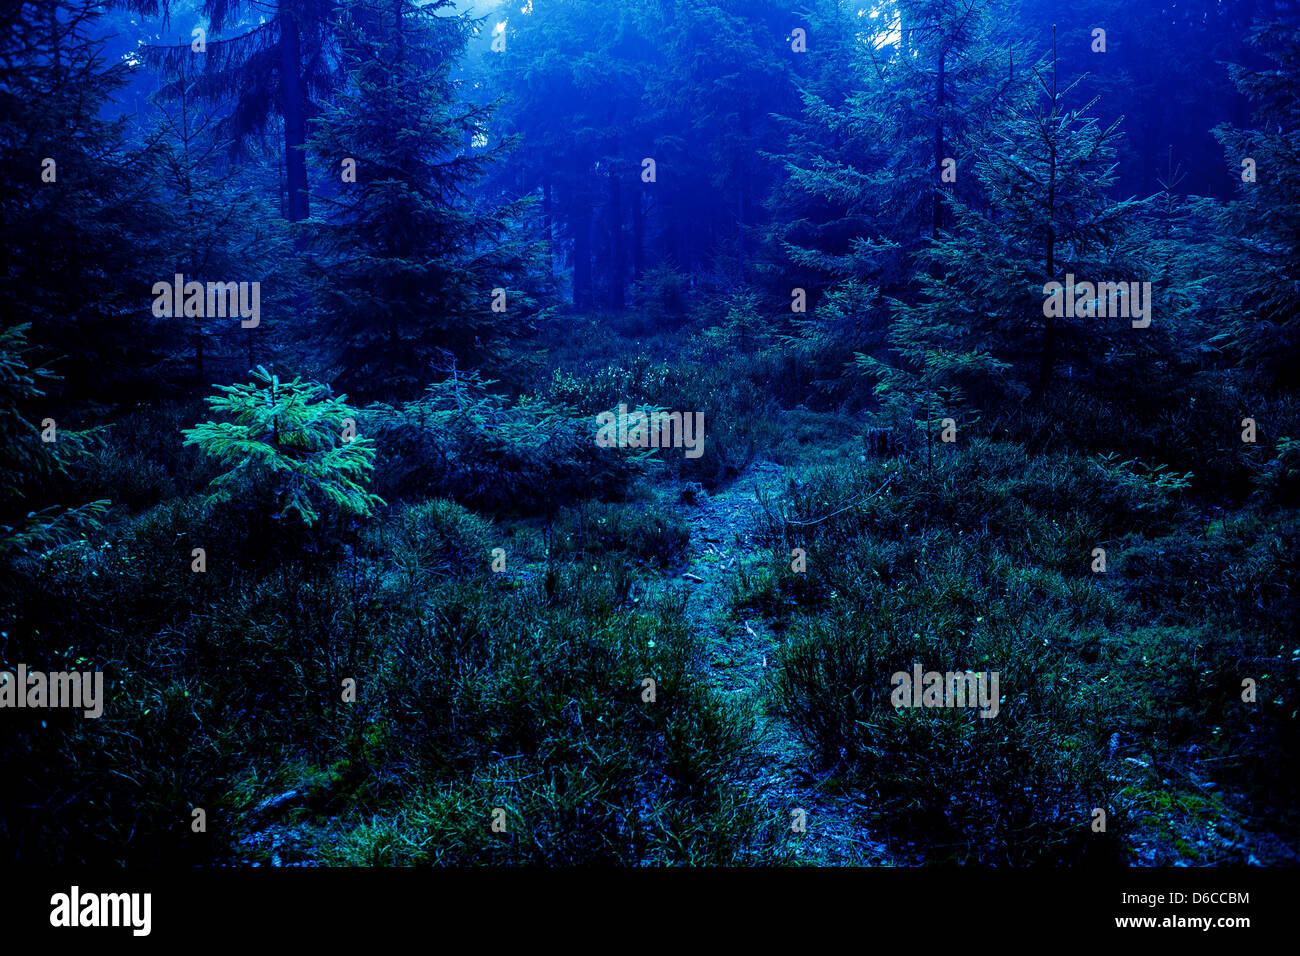 night forest Stock Photo